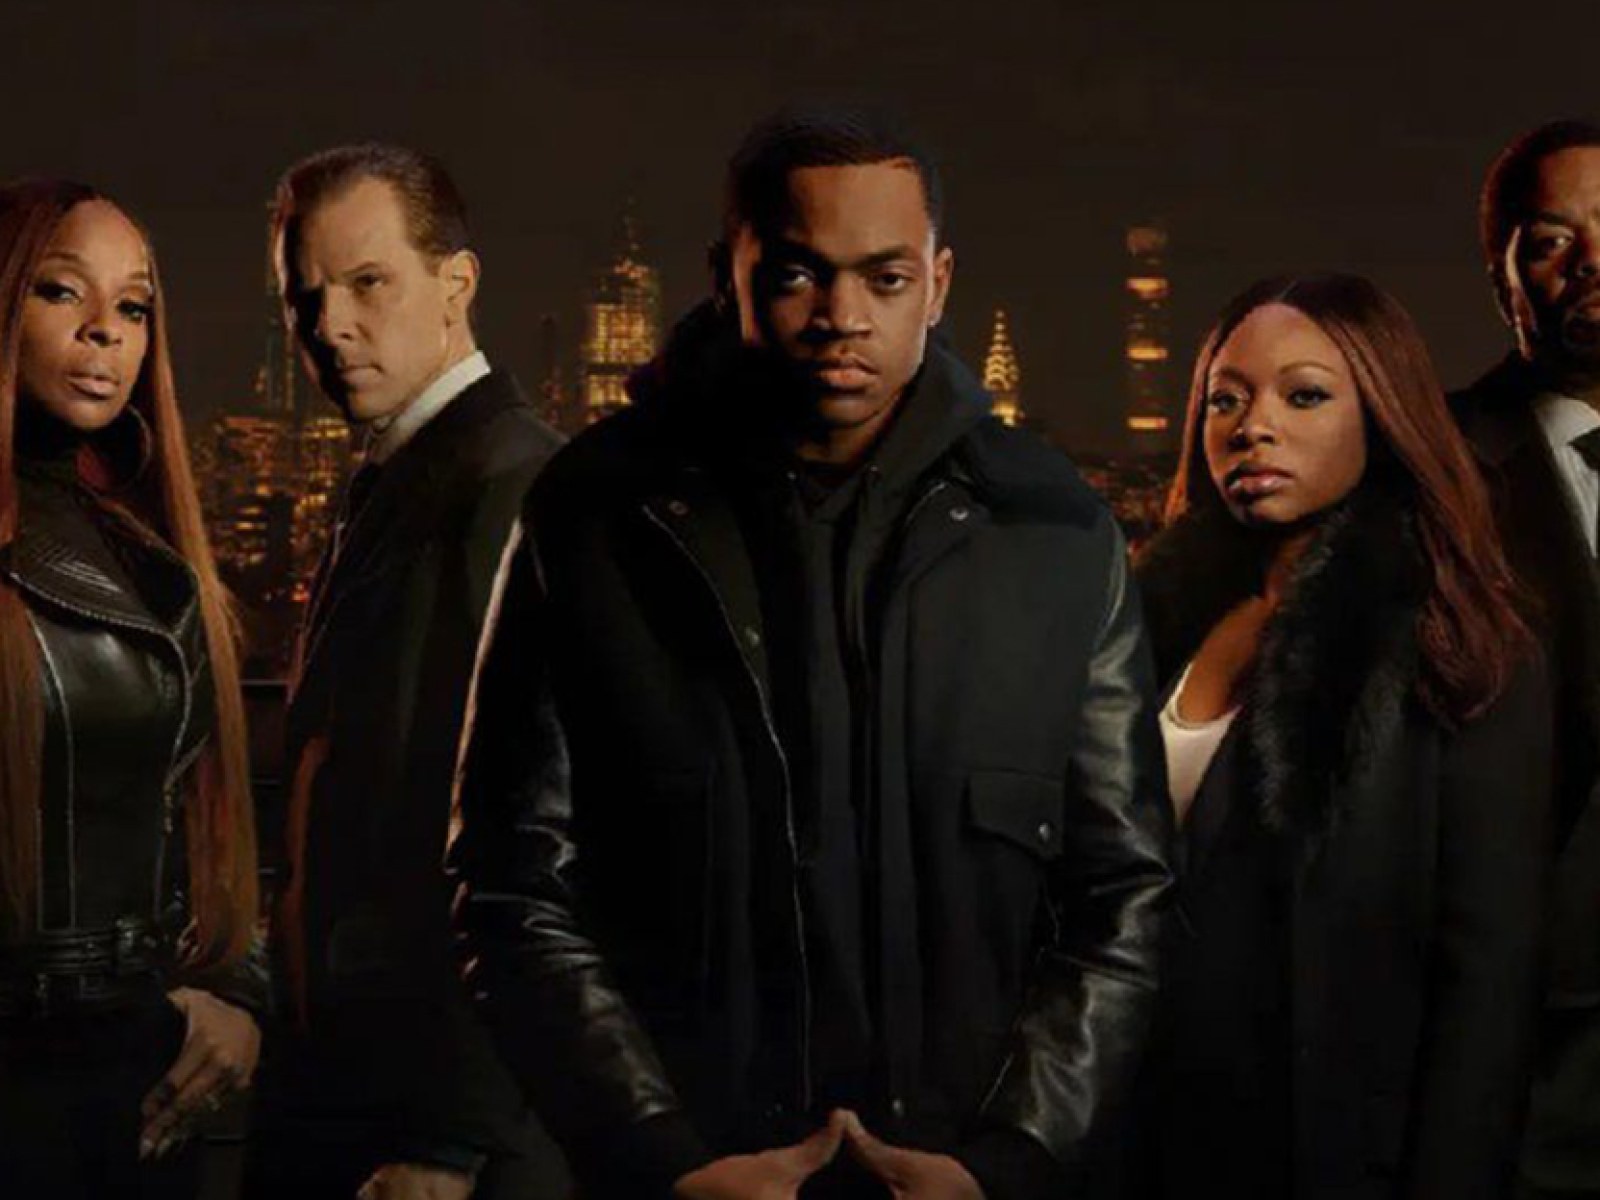 Power Book II Ghost season 4 release date, cast, plot and everything you  need to know